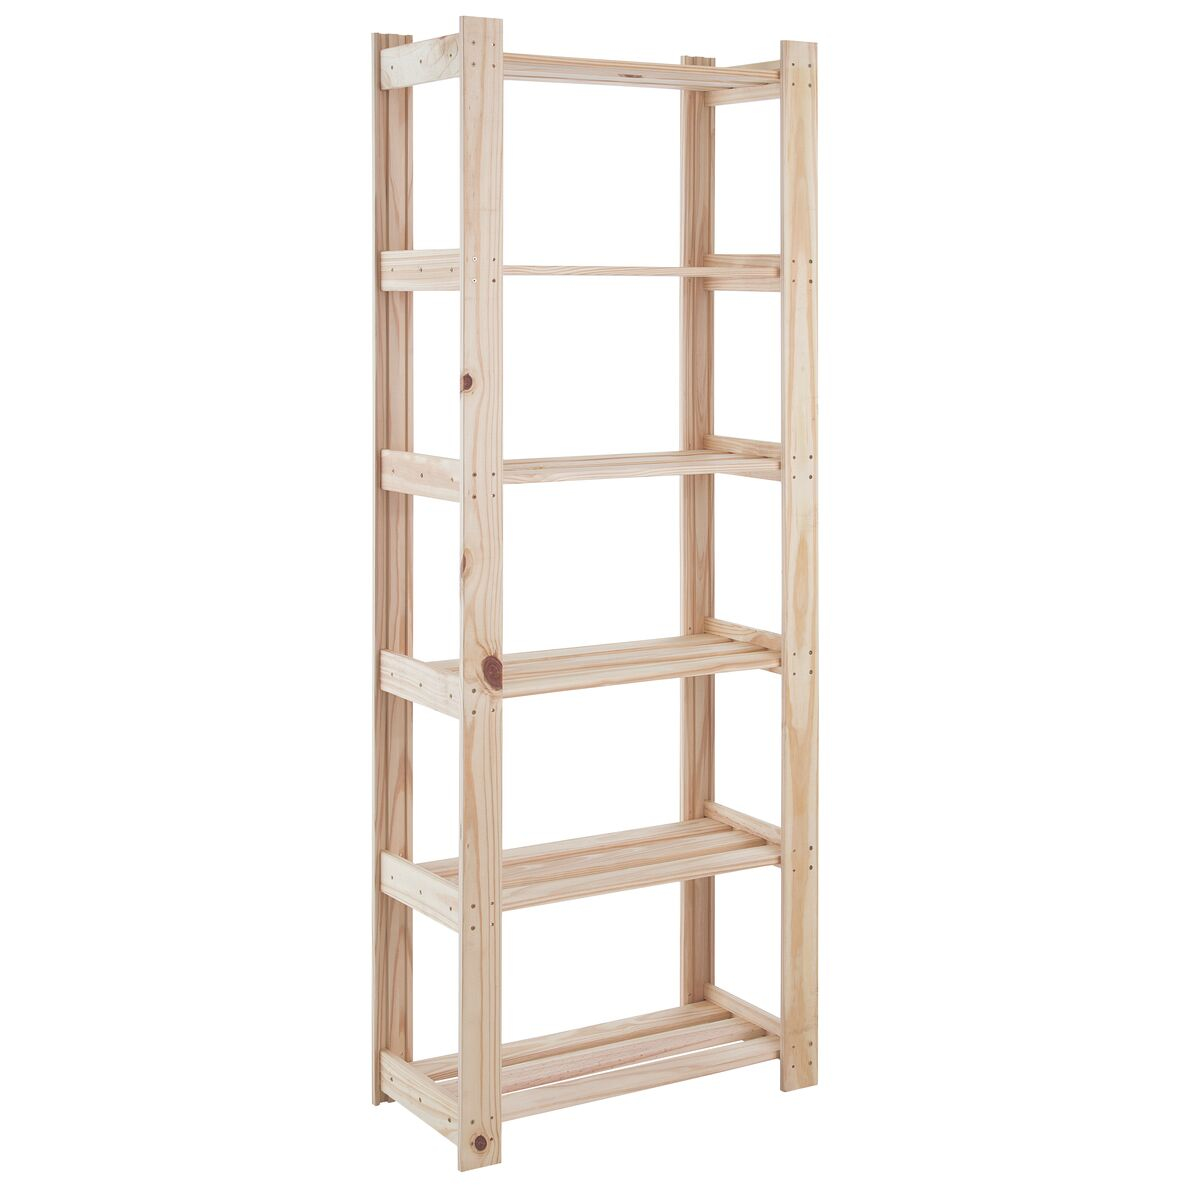 Tramontina Modulare Pine Wood Bookcase with Natural Finish and 6 Shelves, 62.2x30.2 cm
